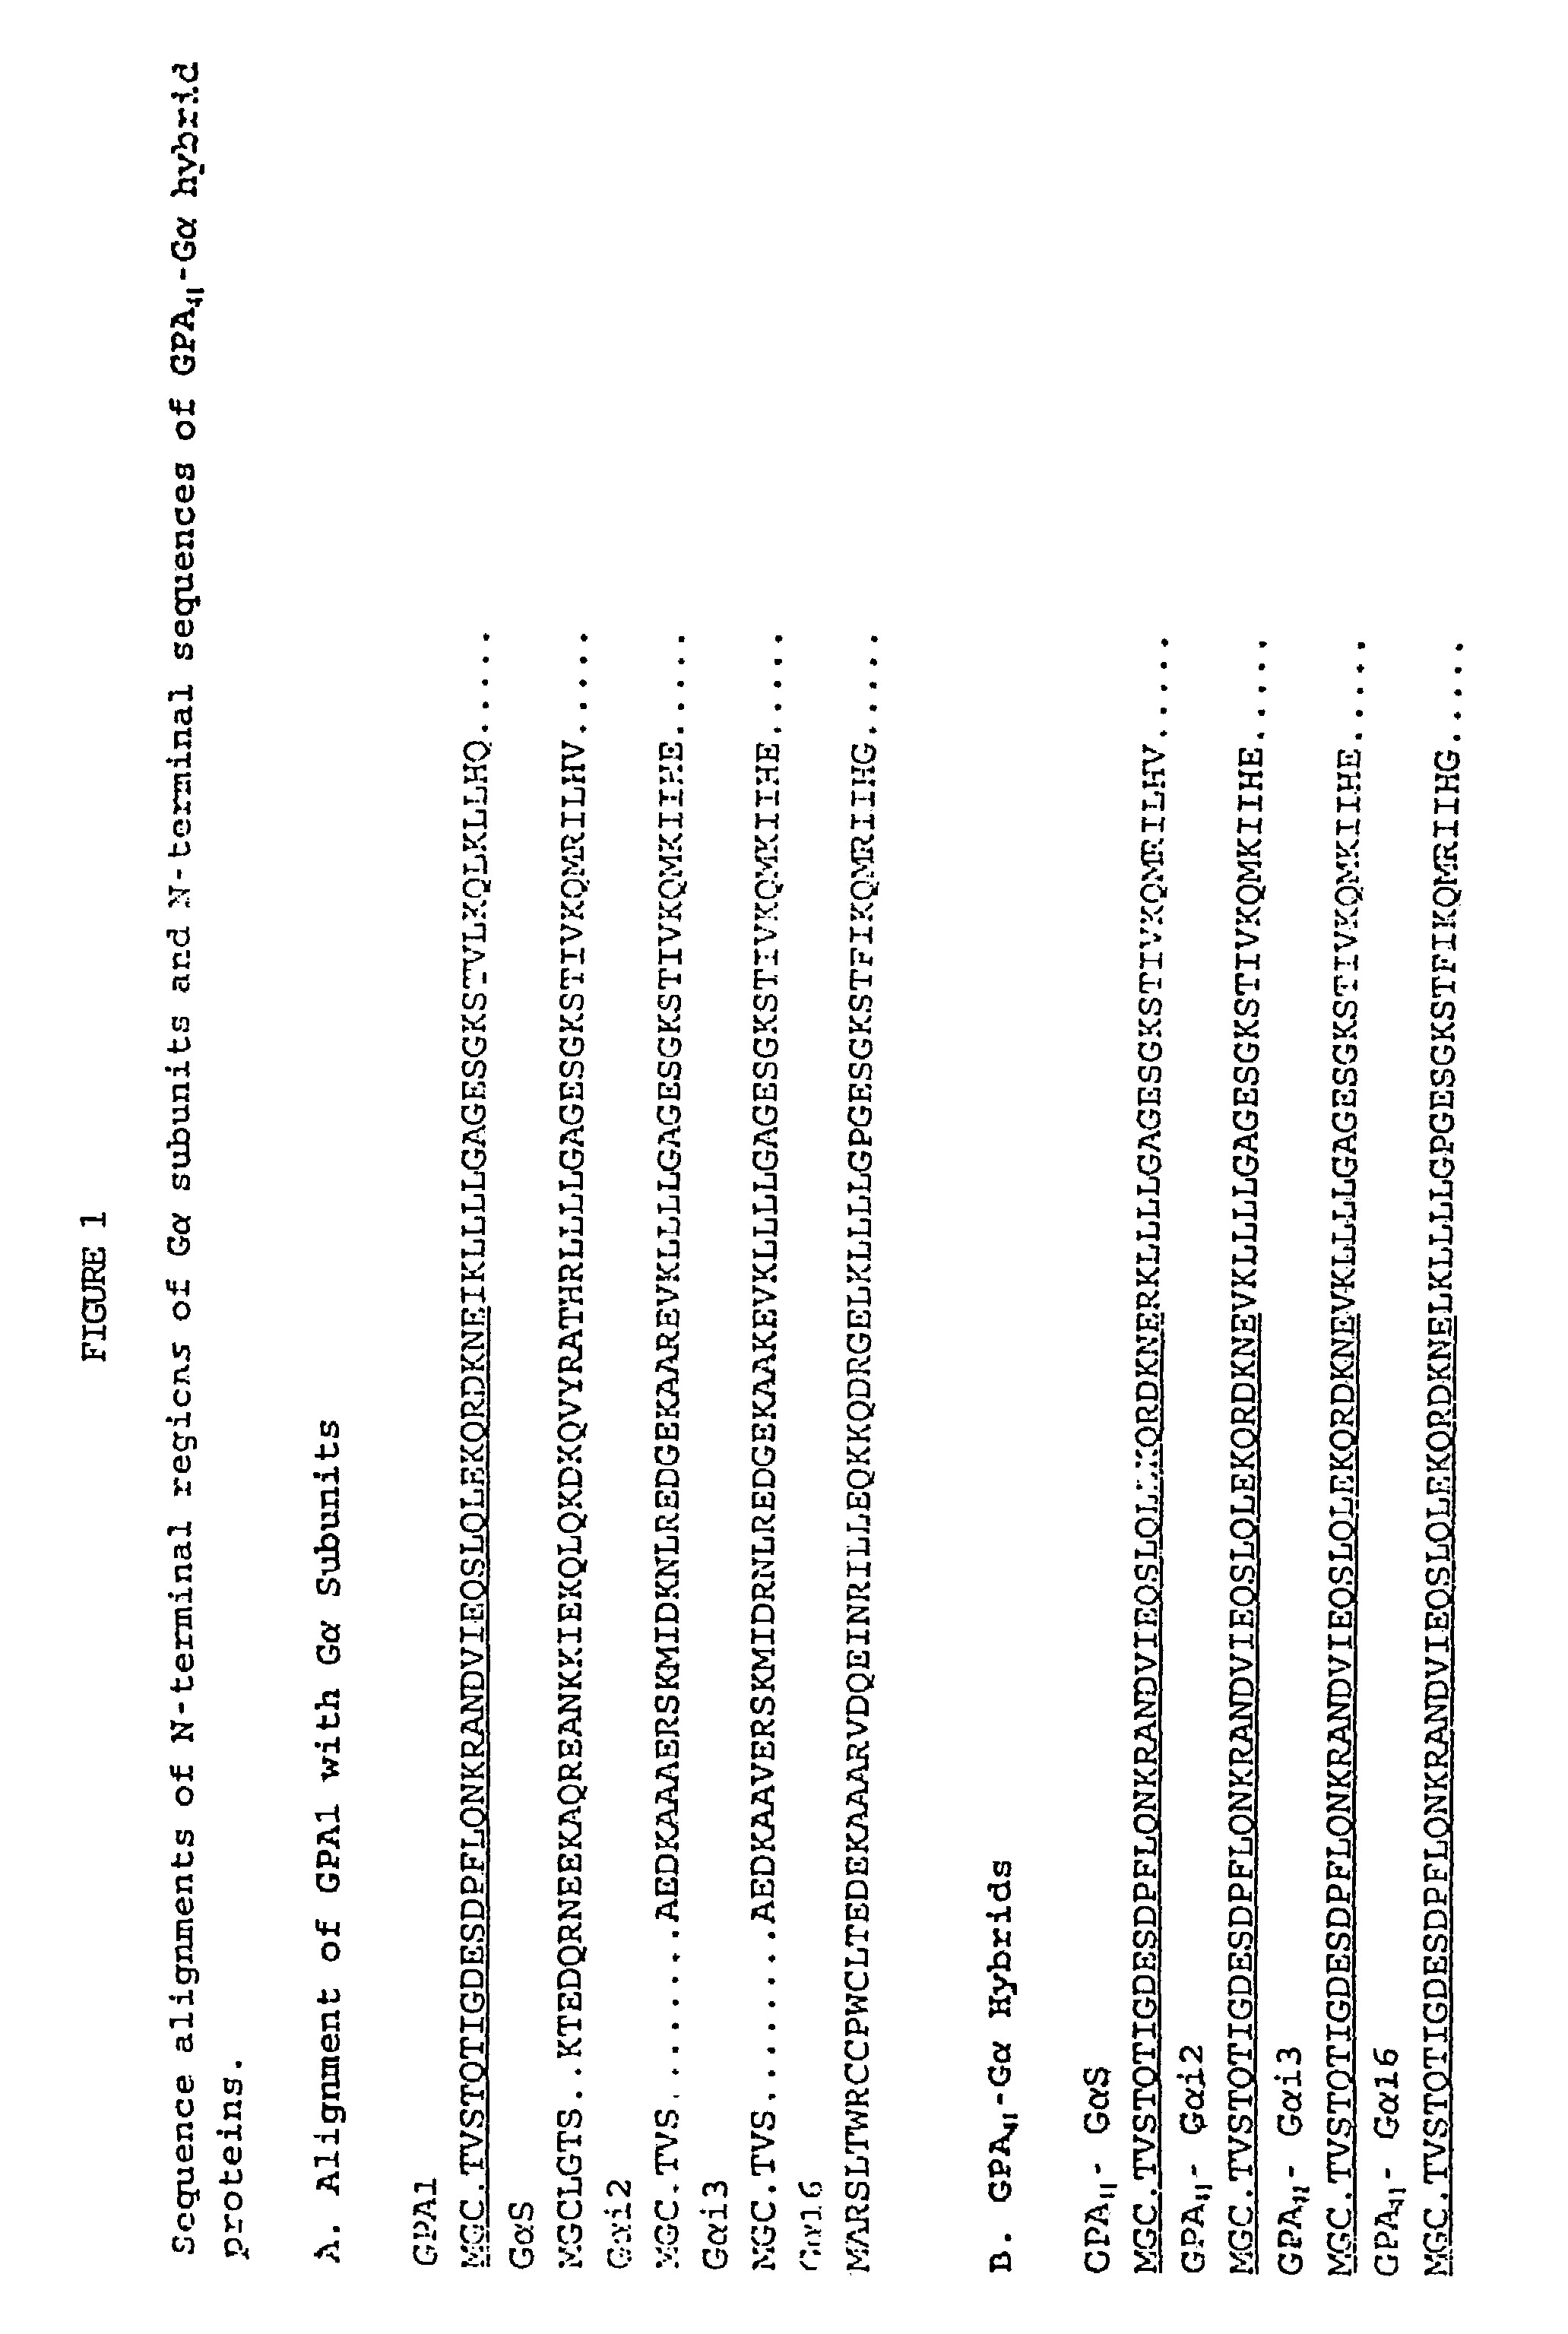 Yeast cells expressing modified G proteins and methods of use therefor